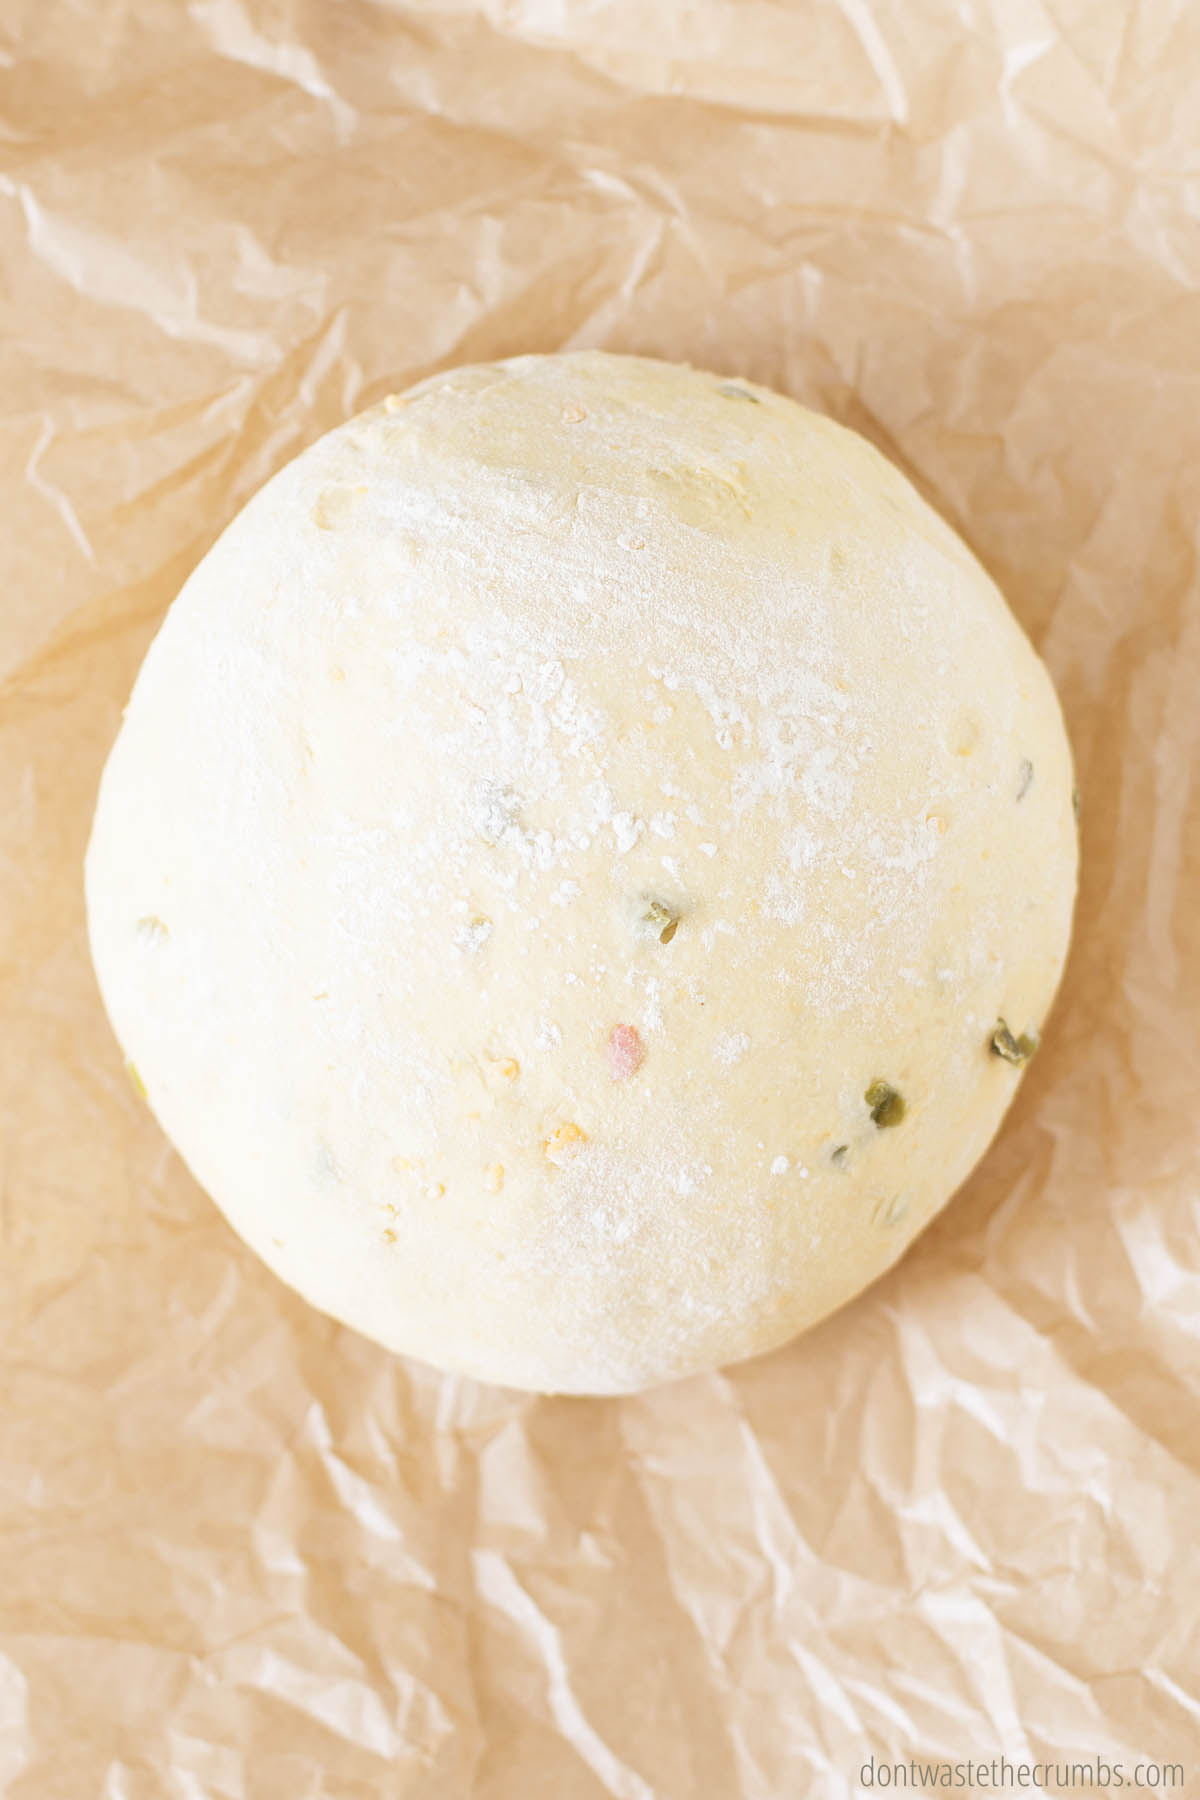 A ball of risen jalapeno cheddar bread dough on parchment paper.